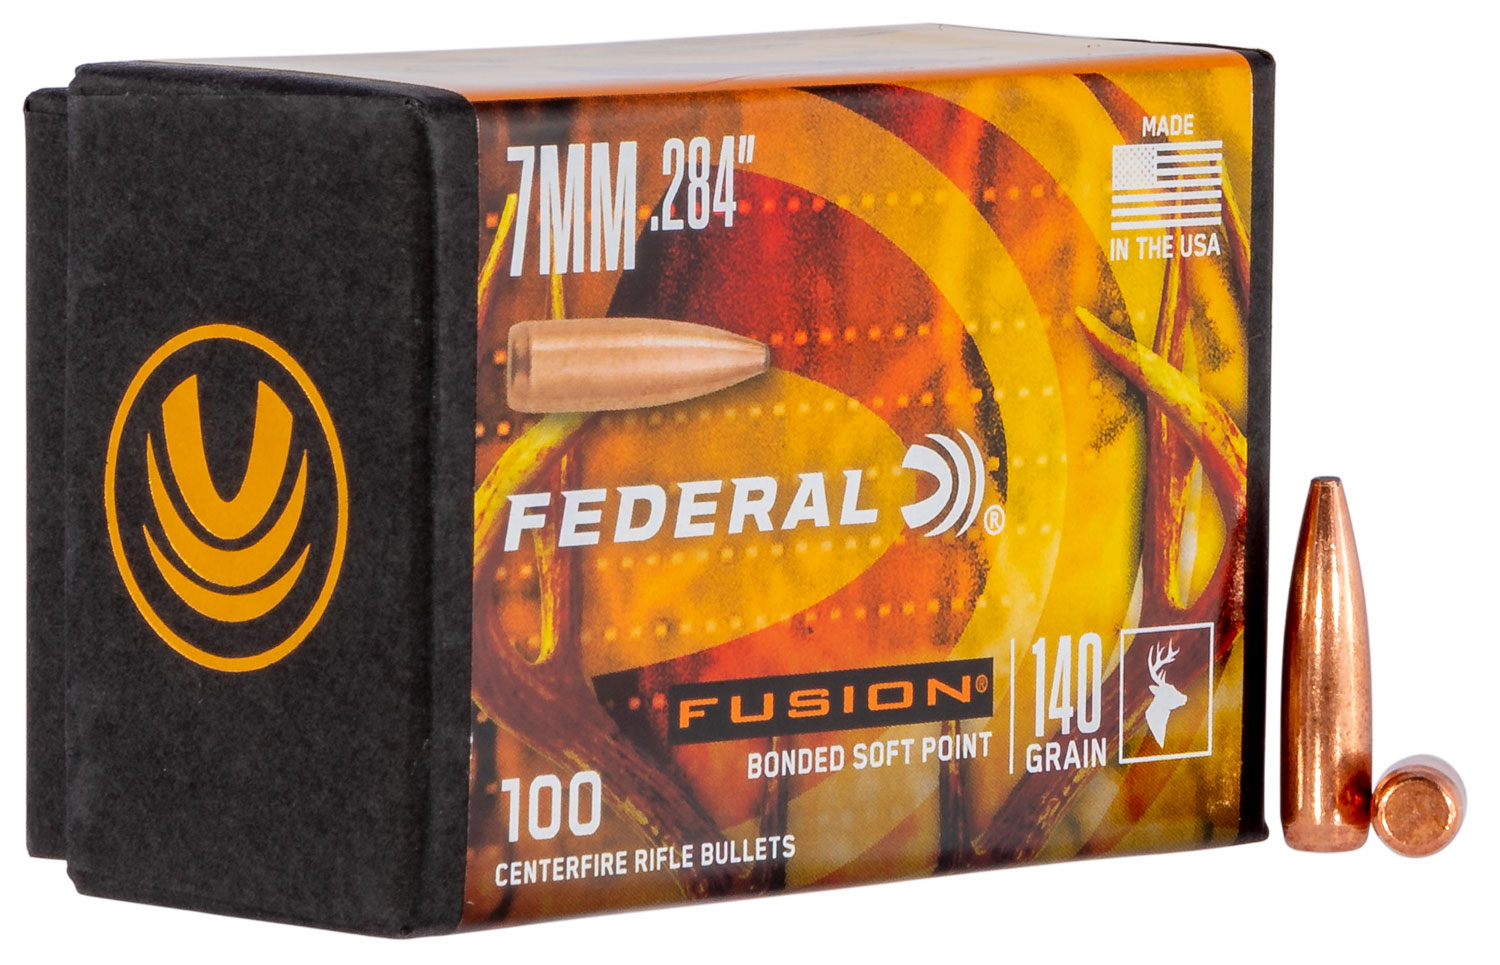 Federal FB284F1 Fusion Component  7mm .284 140 gr Fusion Soft Point